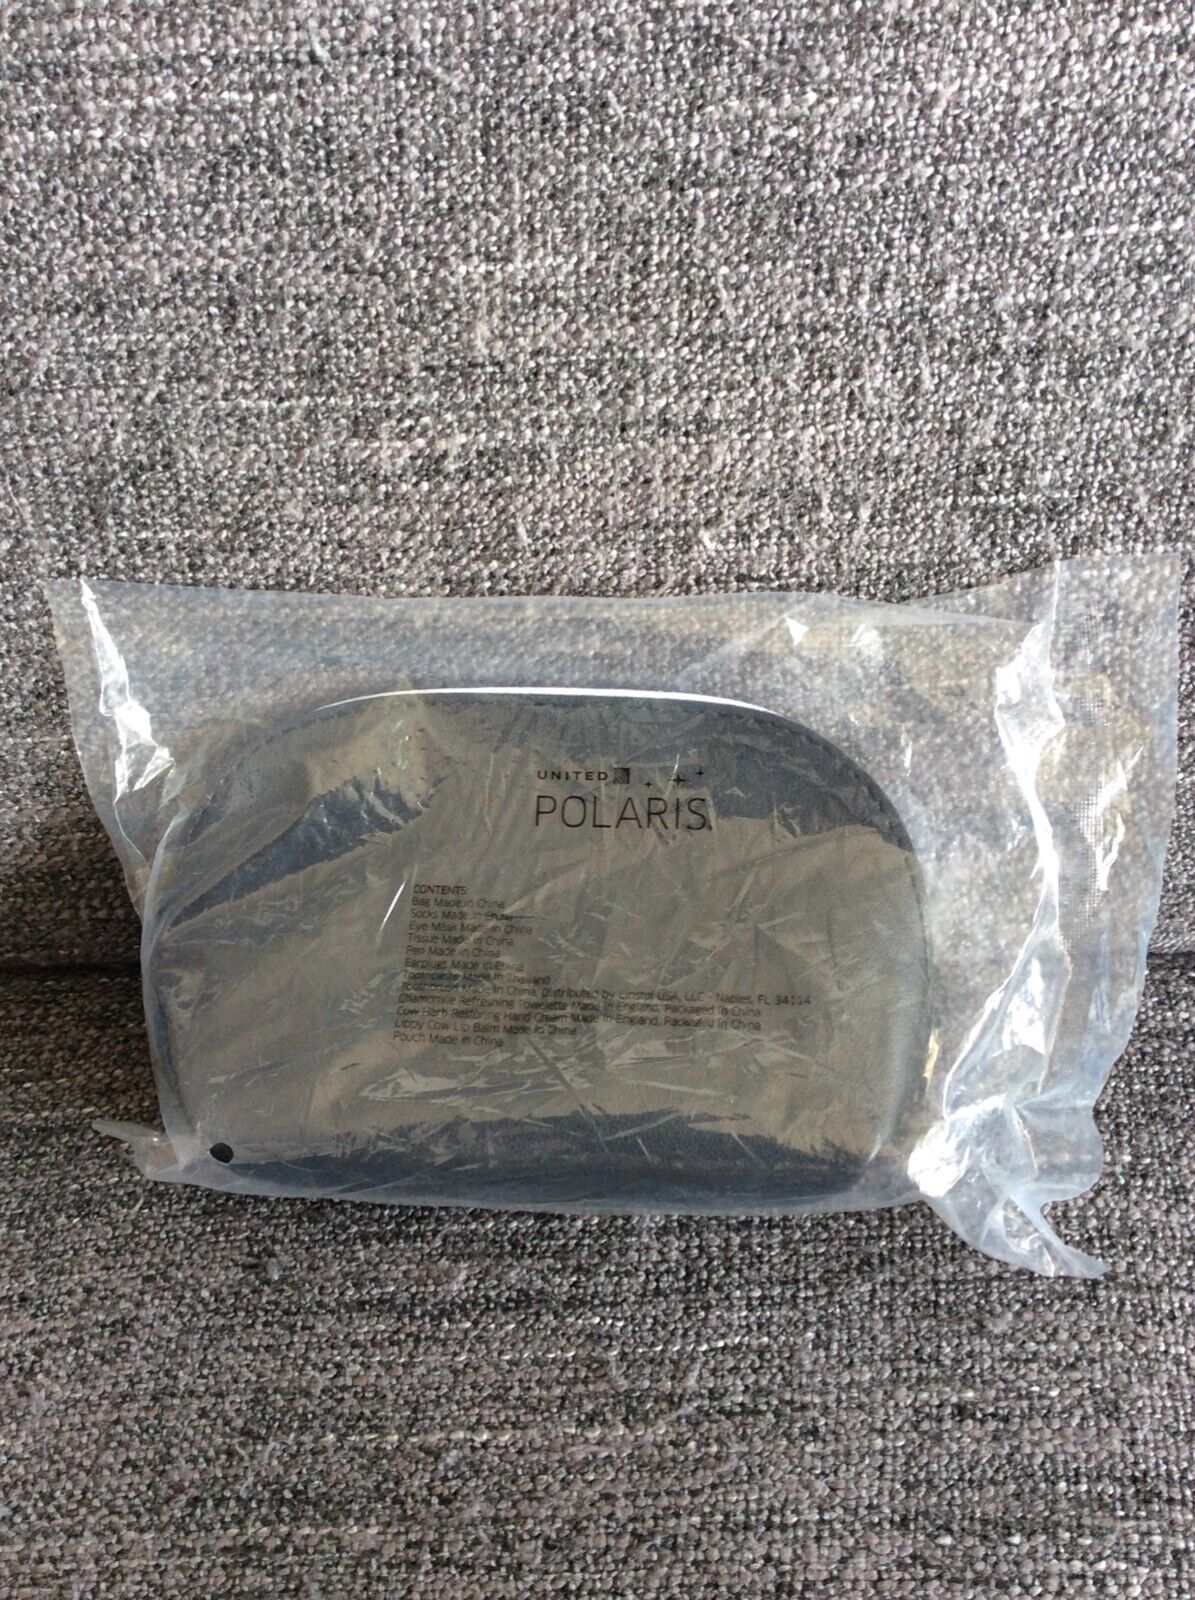 Sealed United Airlines Polaris Business First Class Toiletry Amenity Kit Bag 